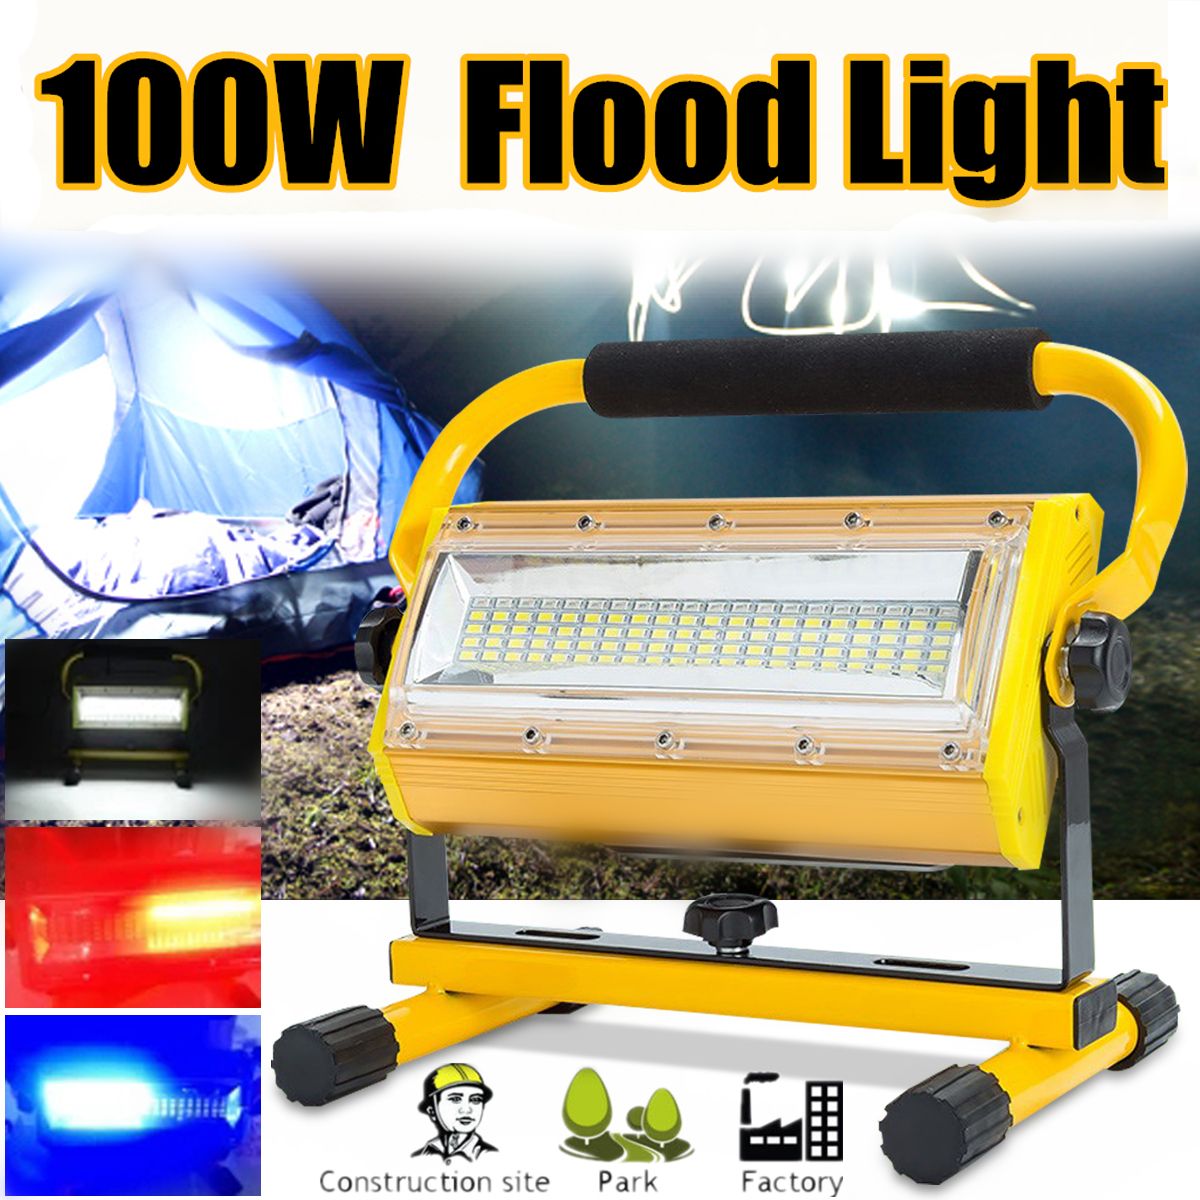 100W-37V-2400Lumens-3Modes-Rechargeable-LED-Floodlight-IP64-Waterproof-Security-Light-1581044